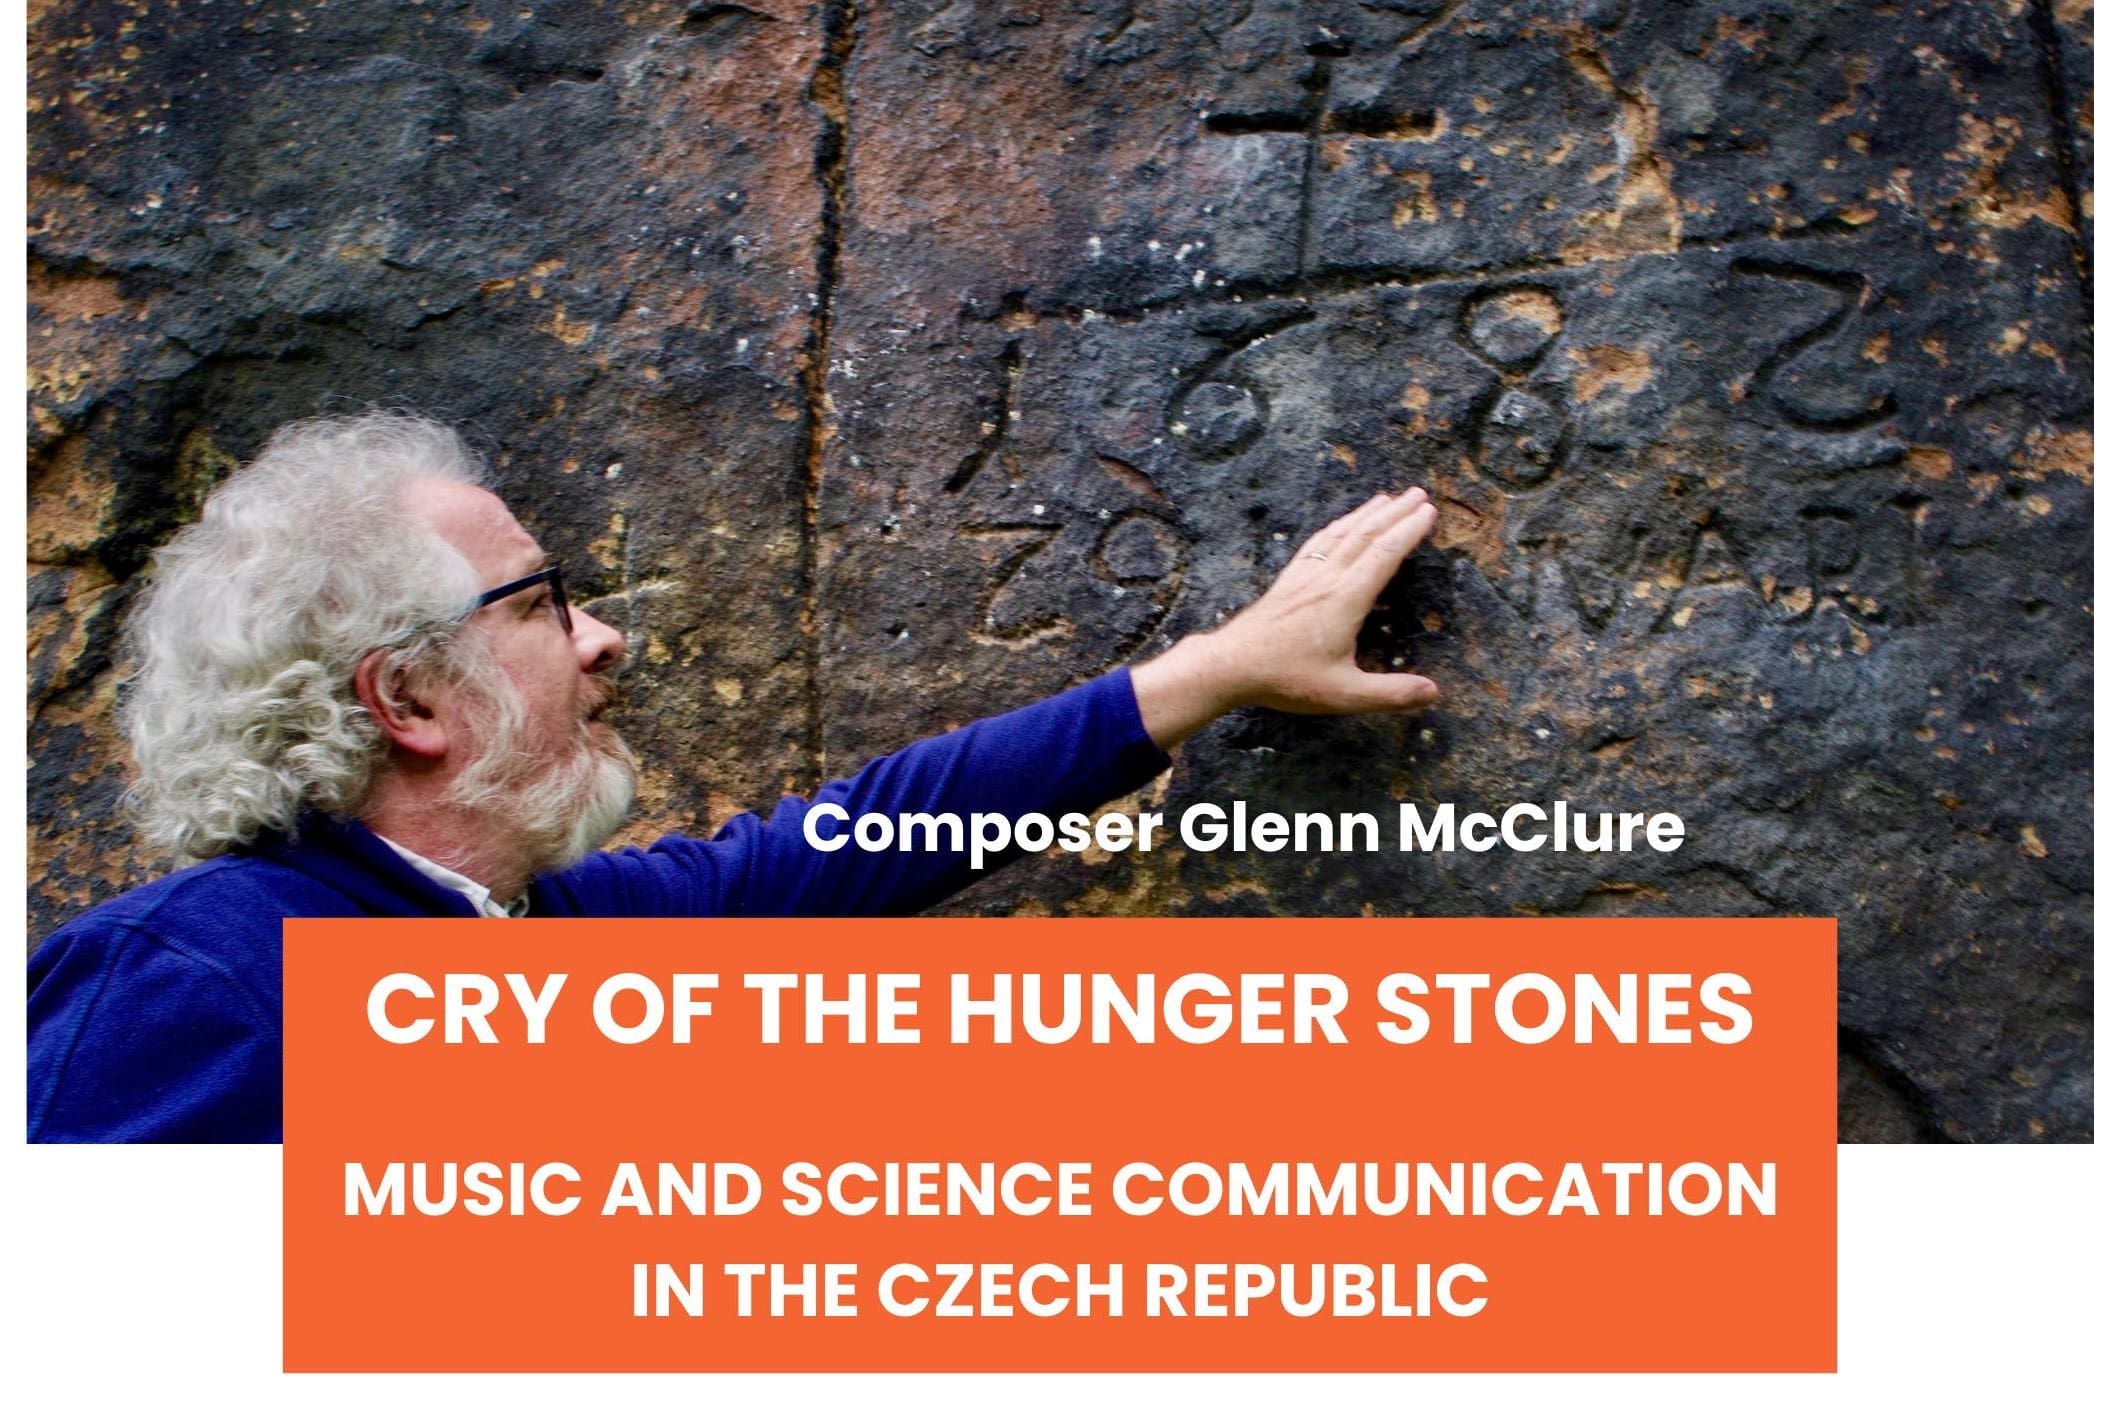 Cry of the Hunger Stones – Music and Science Communication in the Czech Republic